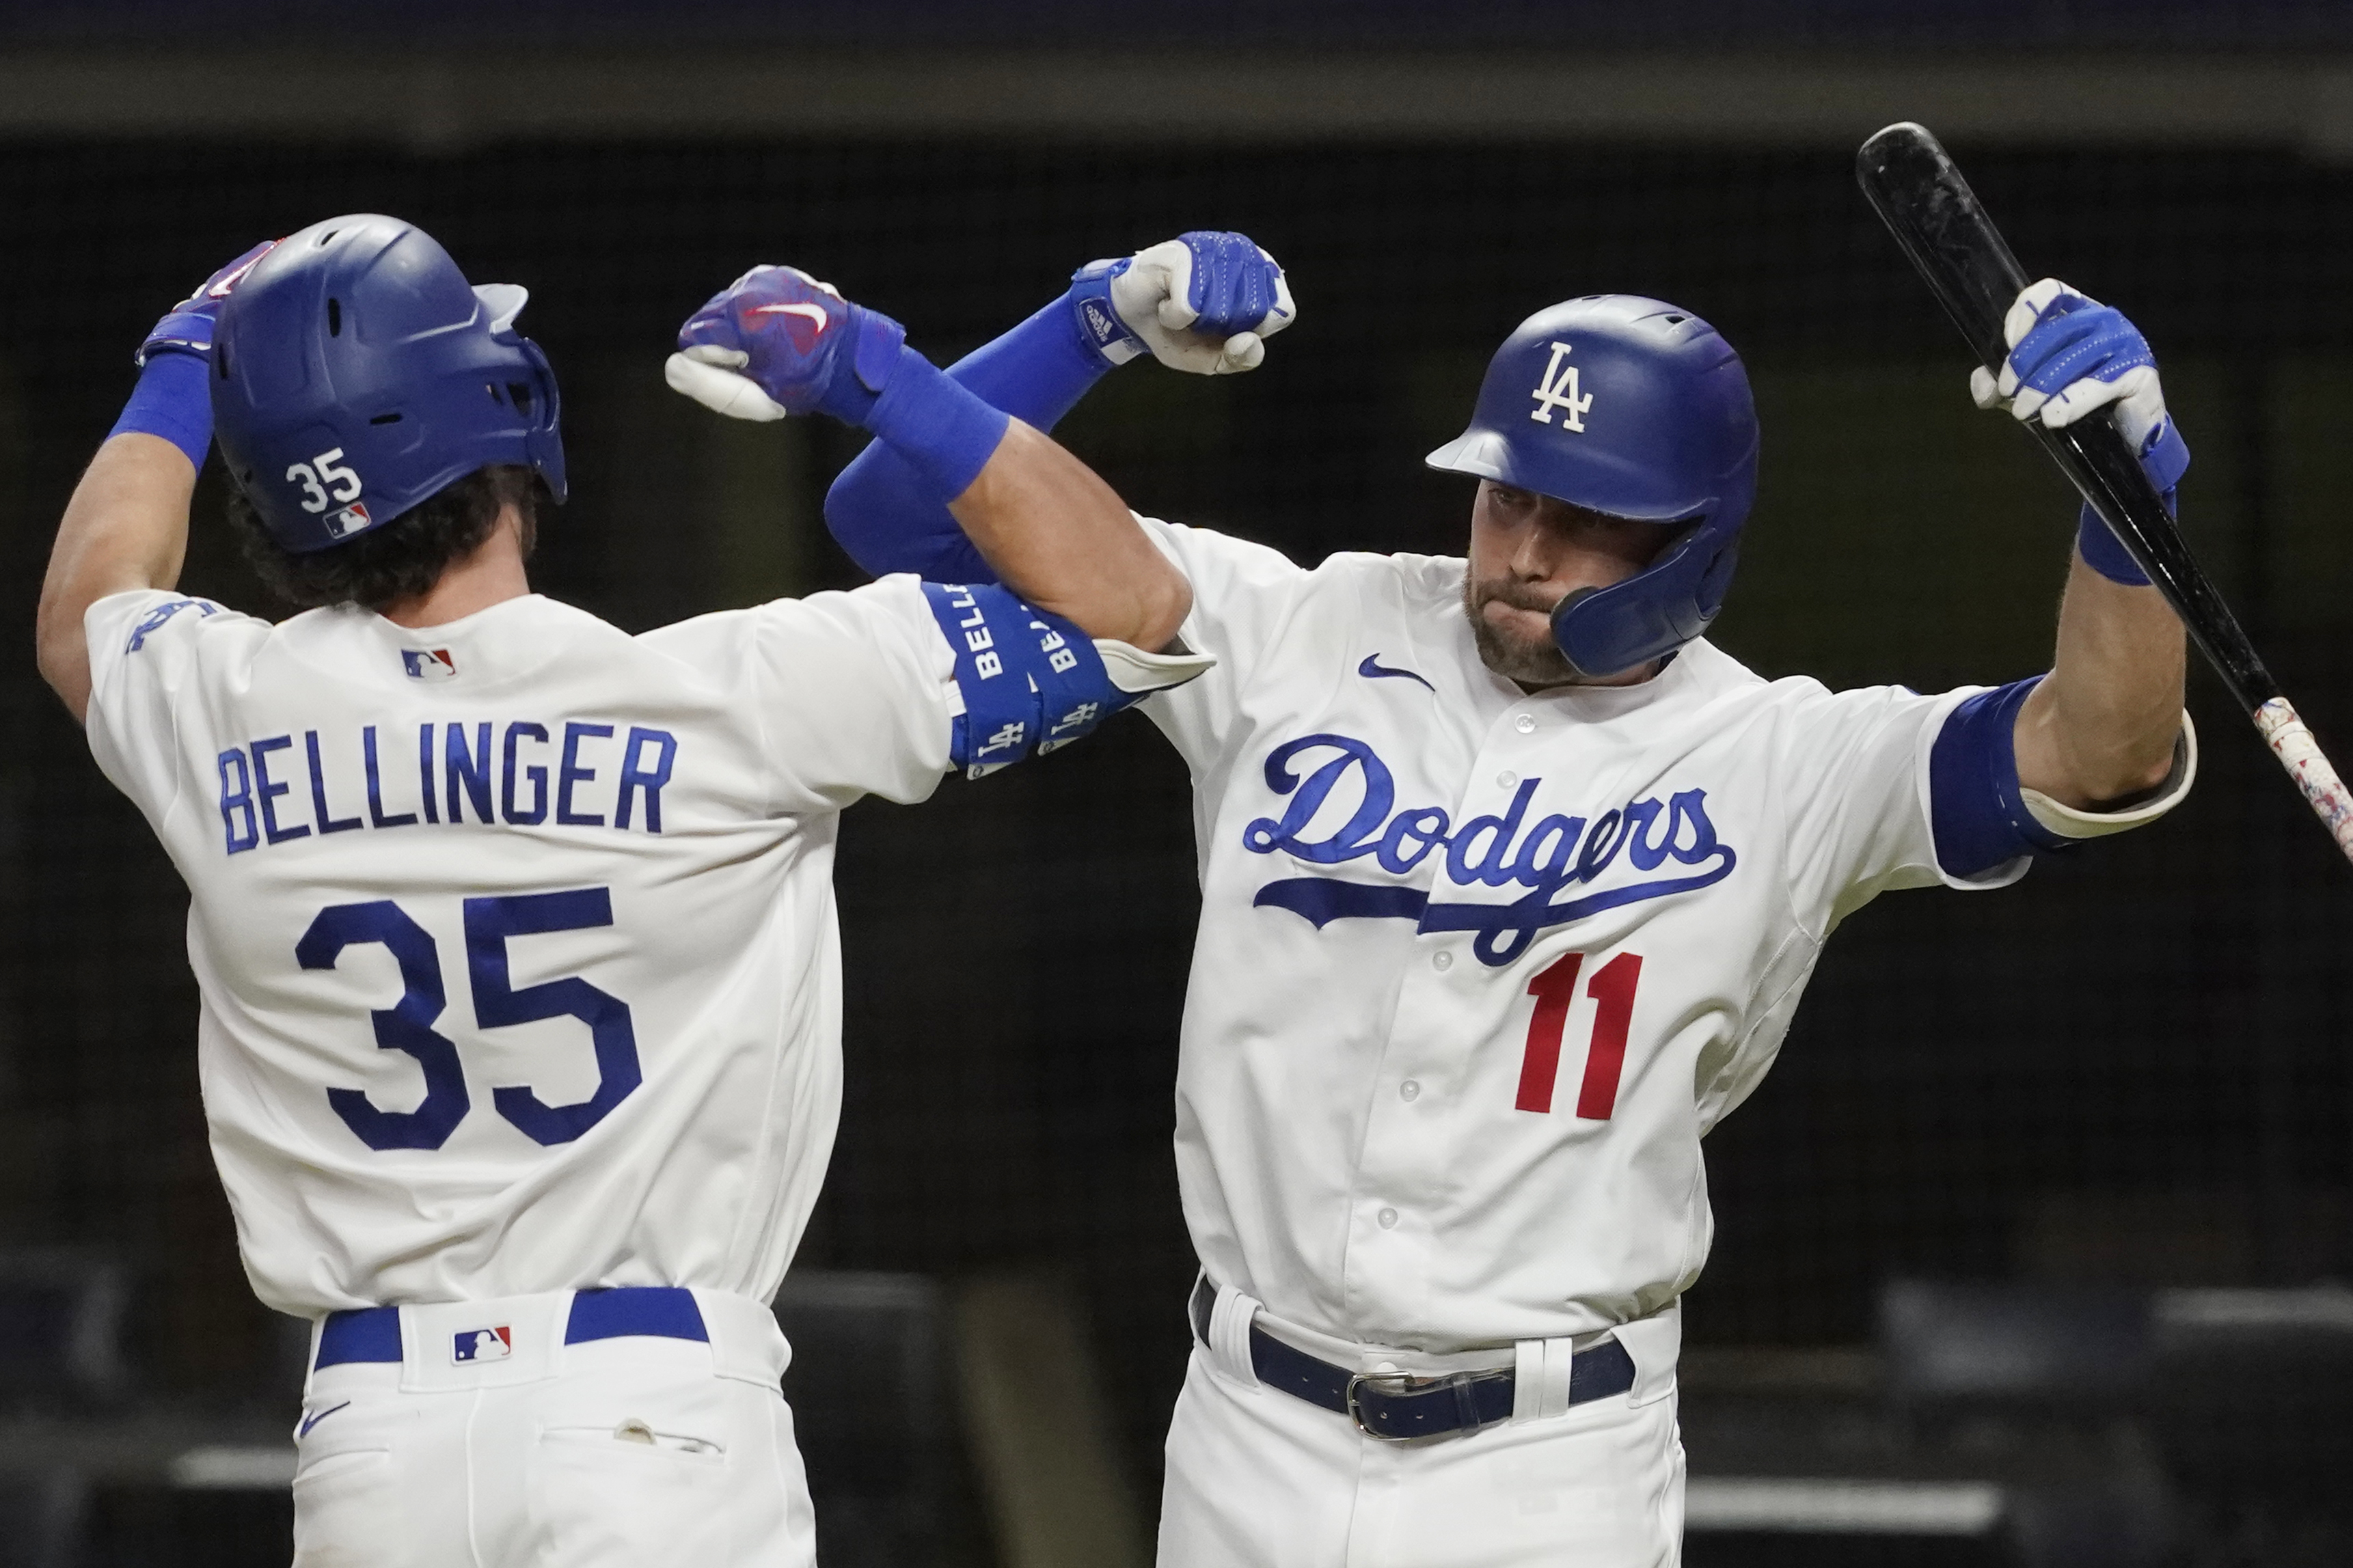 WATCH: Cody Bellinger, 2019 NL MVP, launches first home run since